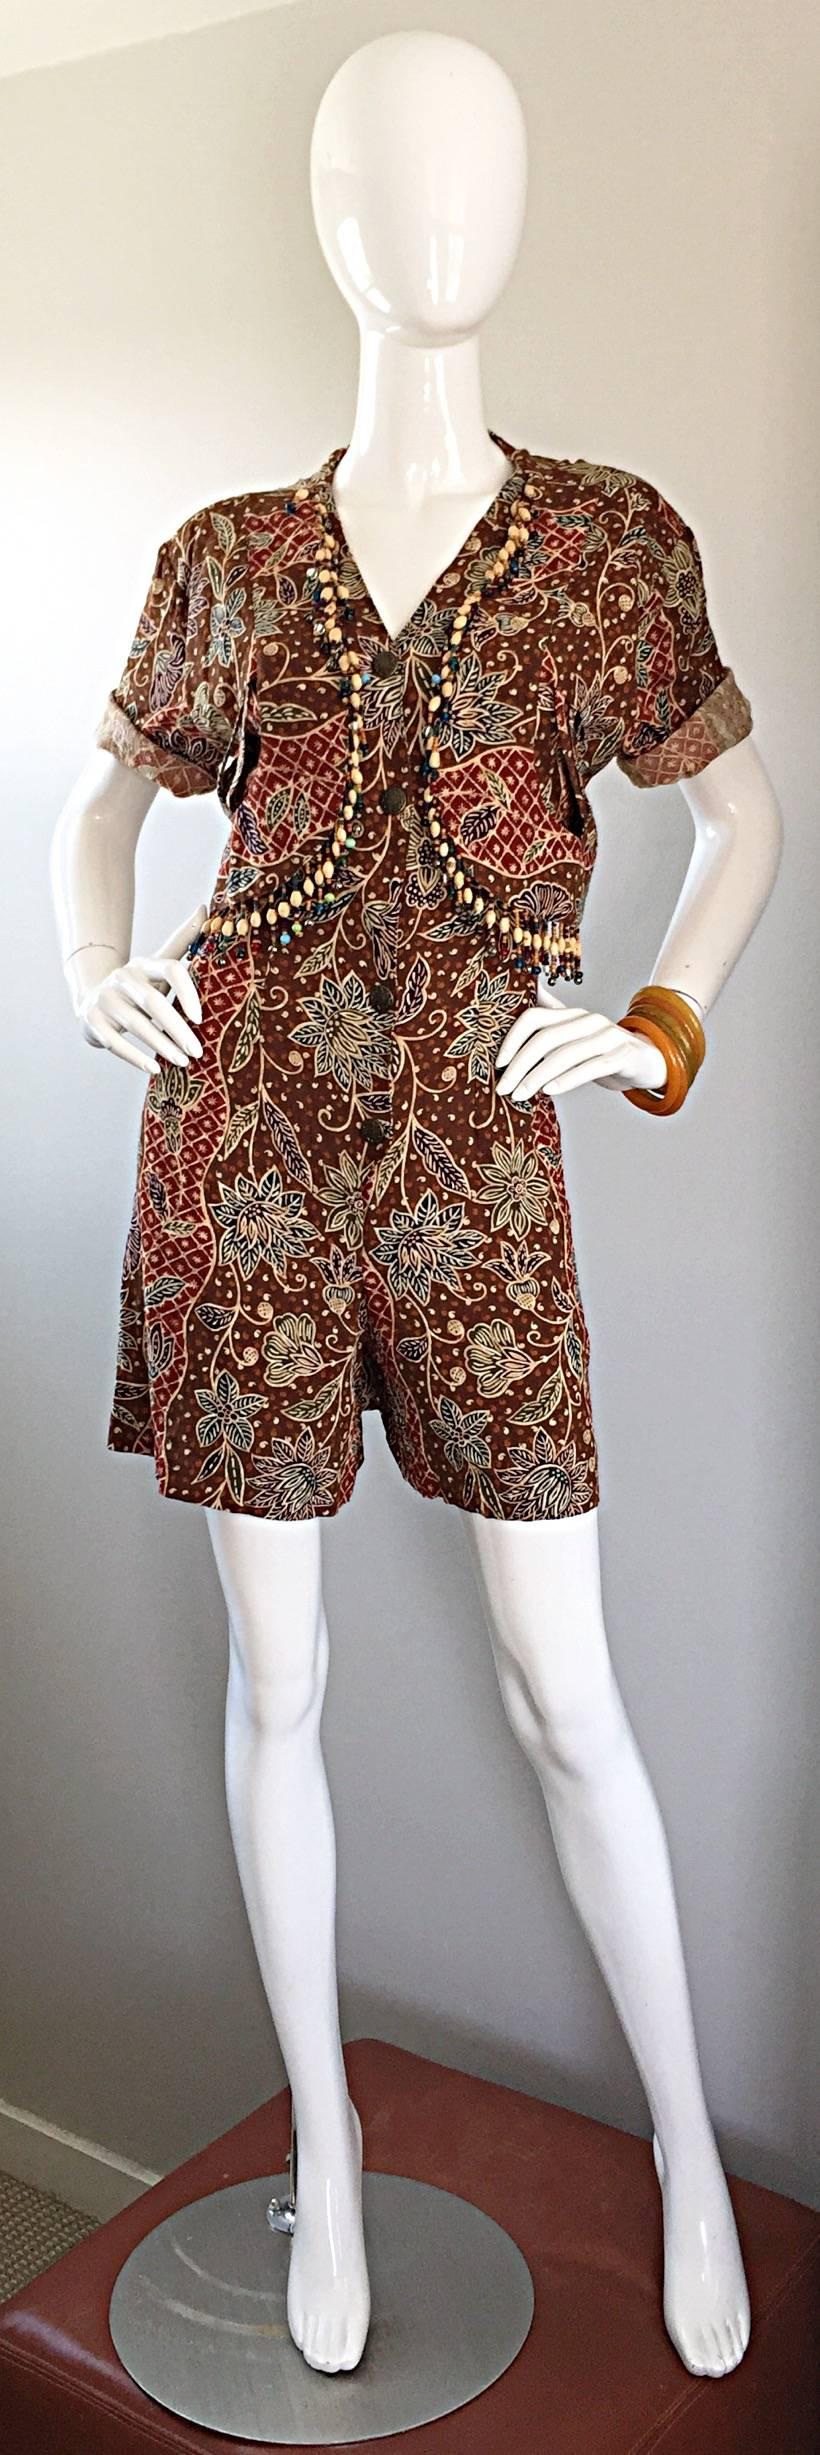 Incredible vintage onesie / romper! Lightweight cotton and rayon blend with tribal ethnic prints throughout. Embellished with hand-sewn beads and bells on the bodice. Attached vest features crochet cut-outs at each side. Hidden zipper up the front